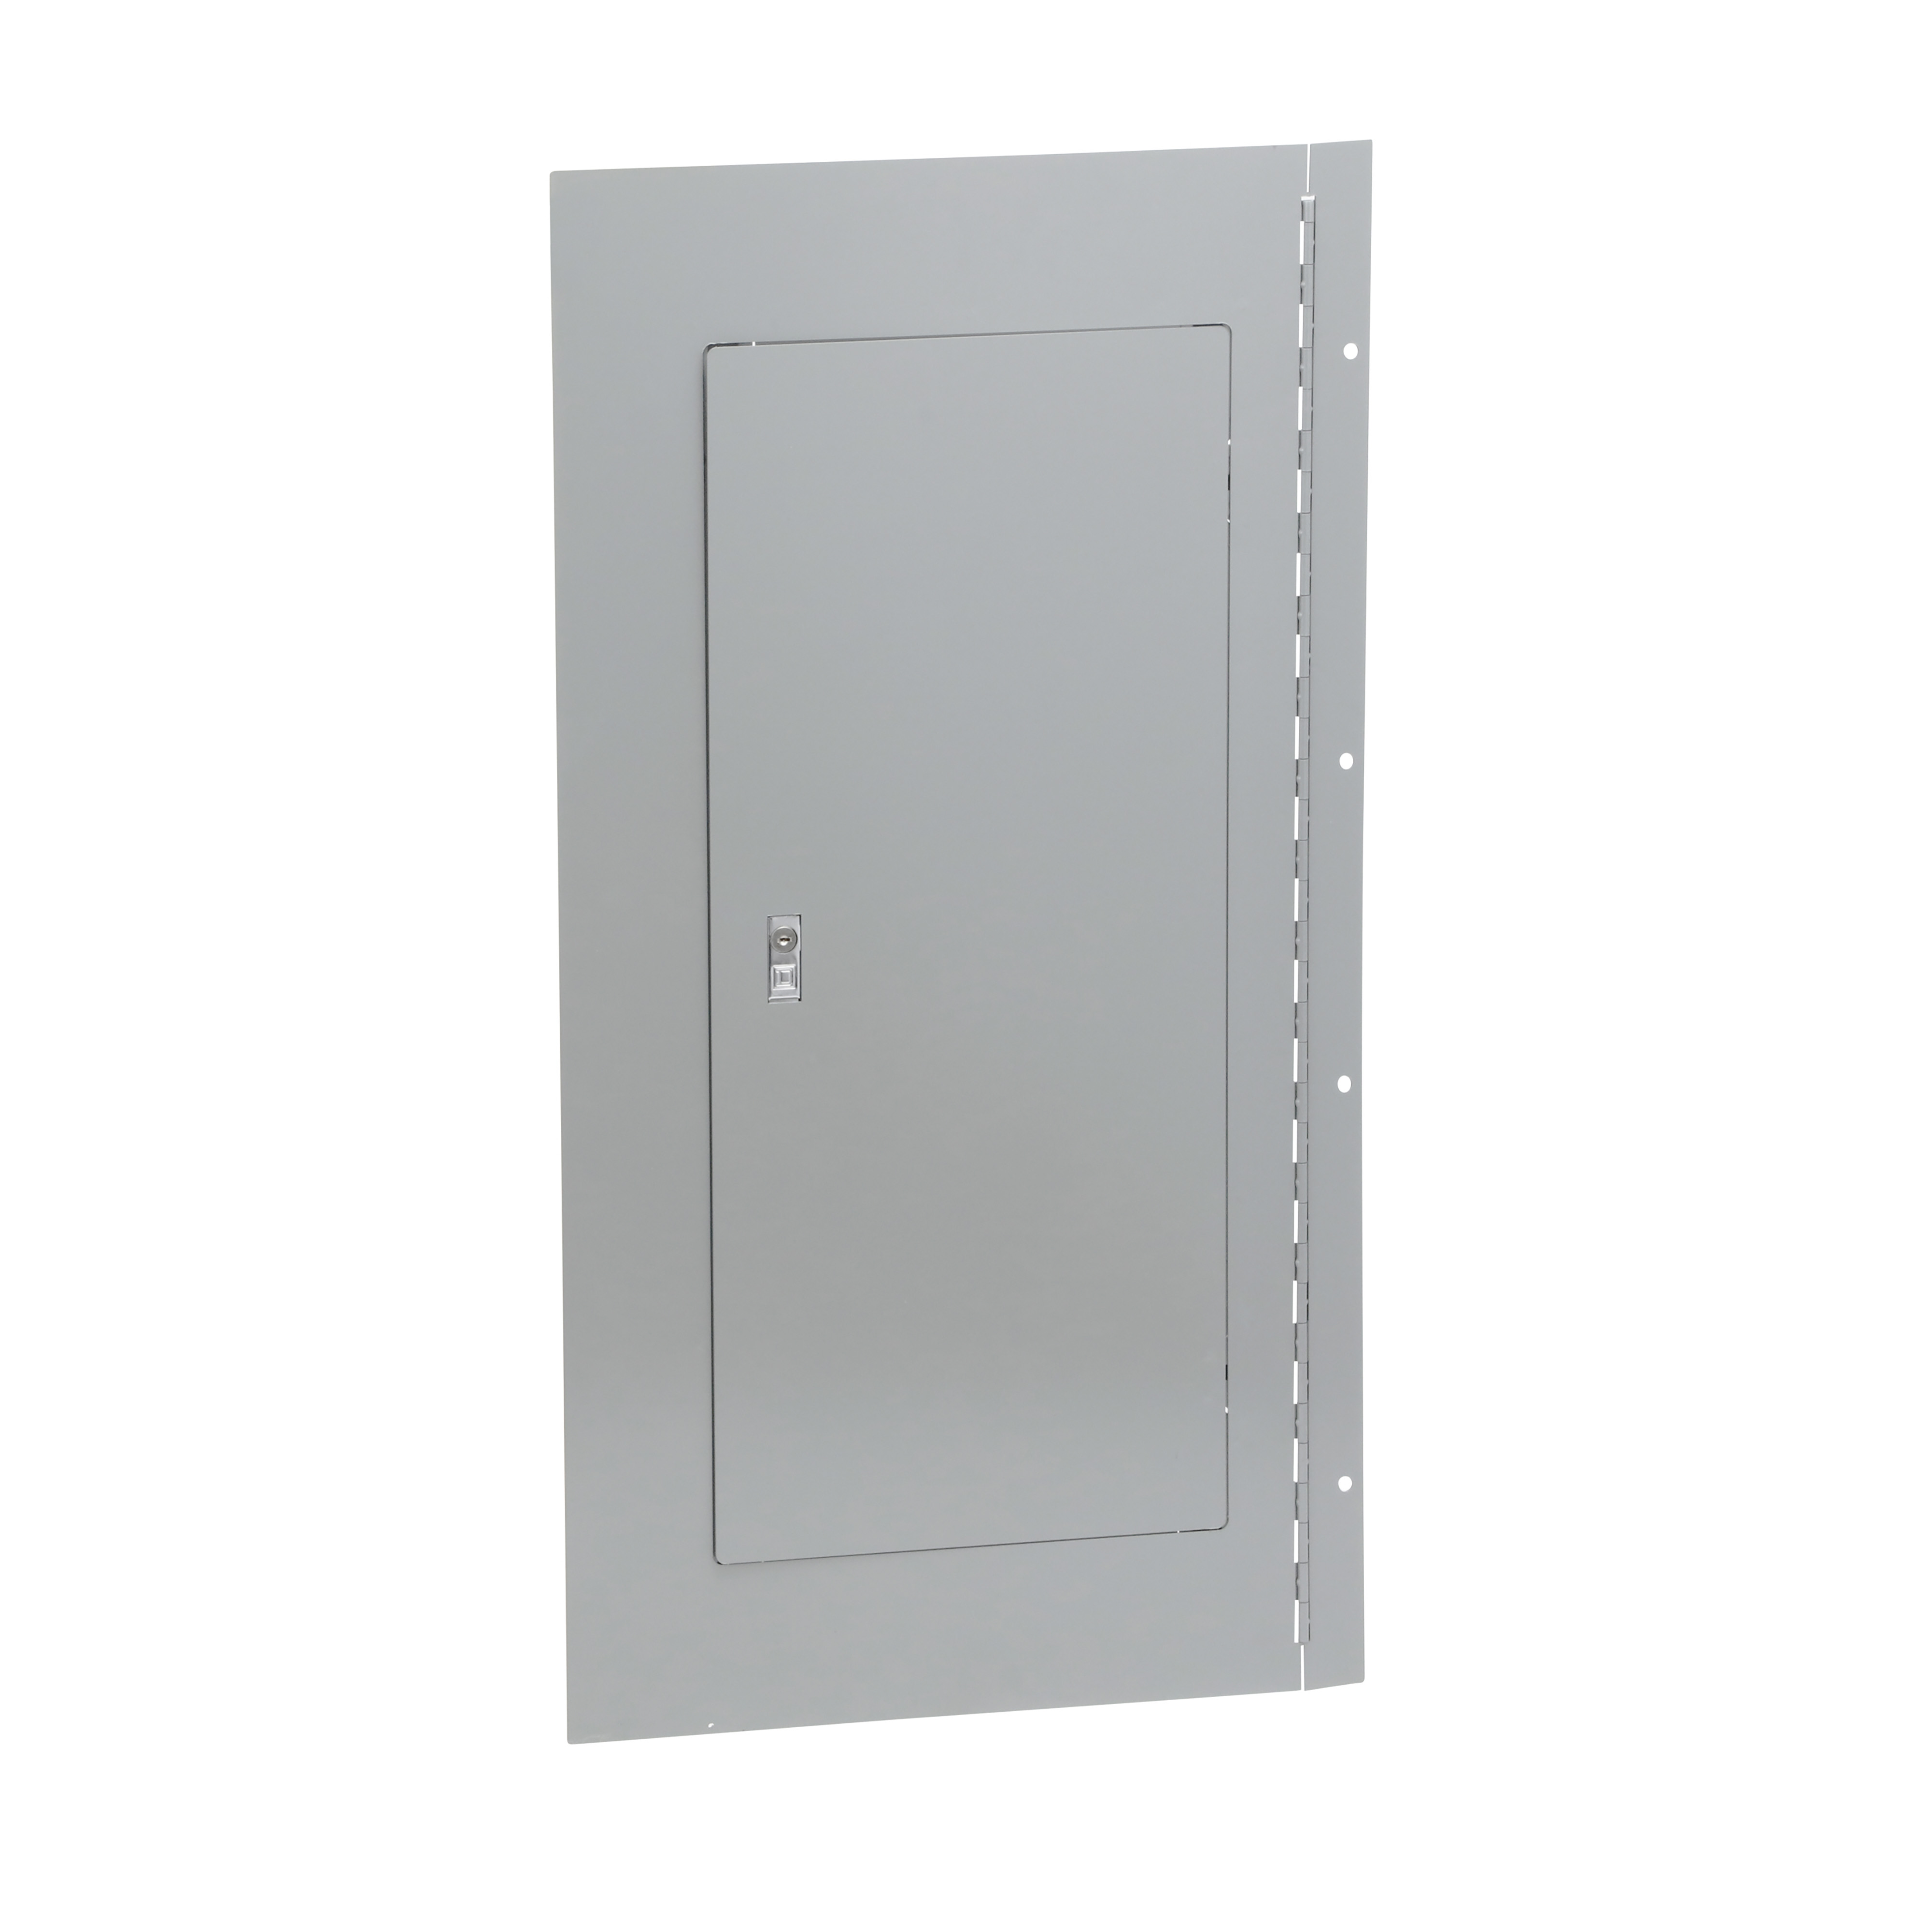 Enclosure cover, NQ and NF panelboards, NEMA 1, surface, hinged, 20in W x 38in H